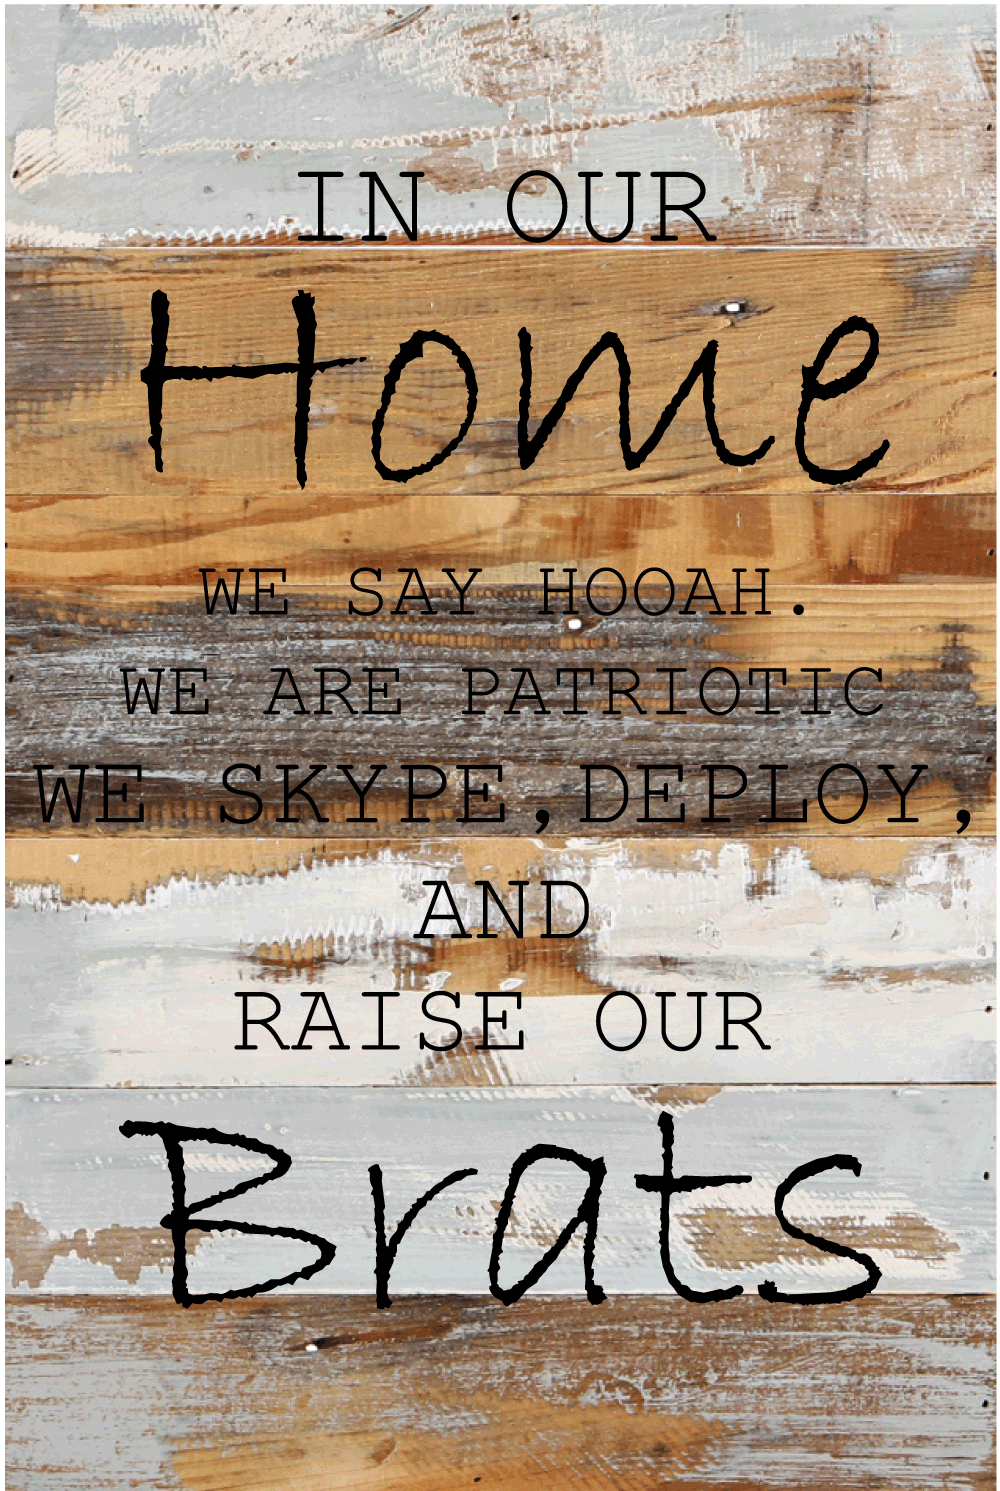 12x18 IN OUR HOME WOOD SIGN - ARMY - UNIFORMED®